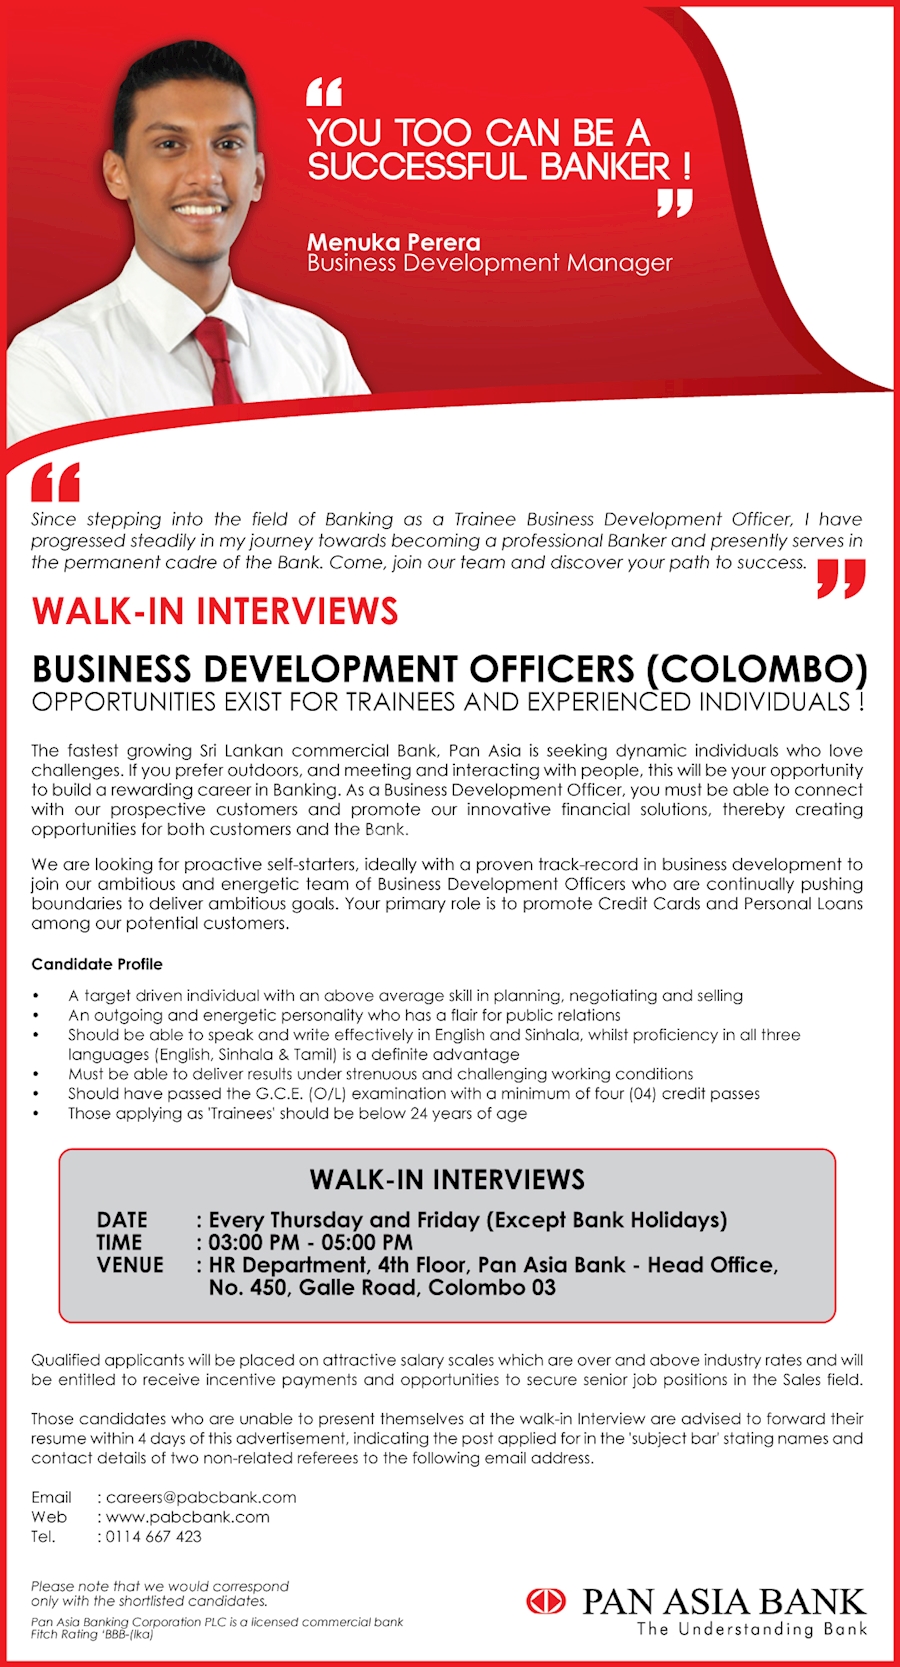 Business Development Officers - Colombo